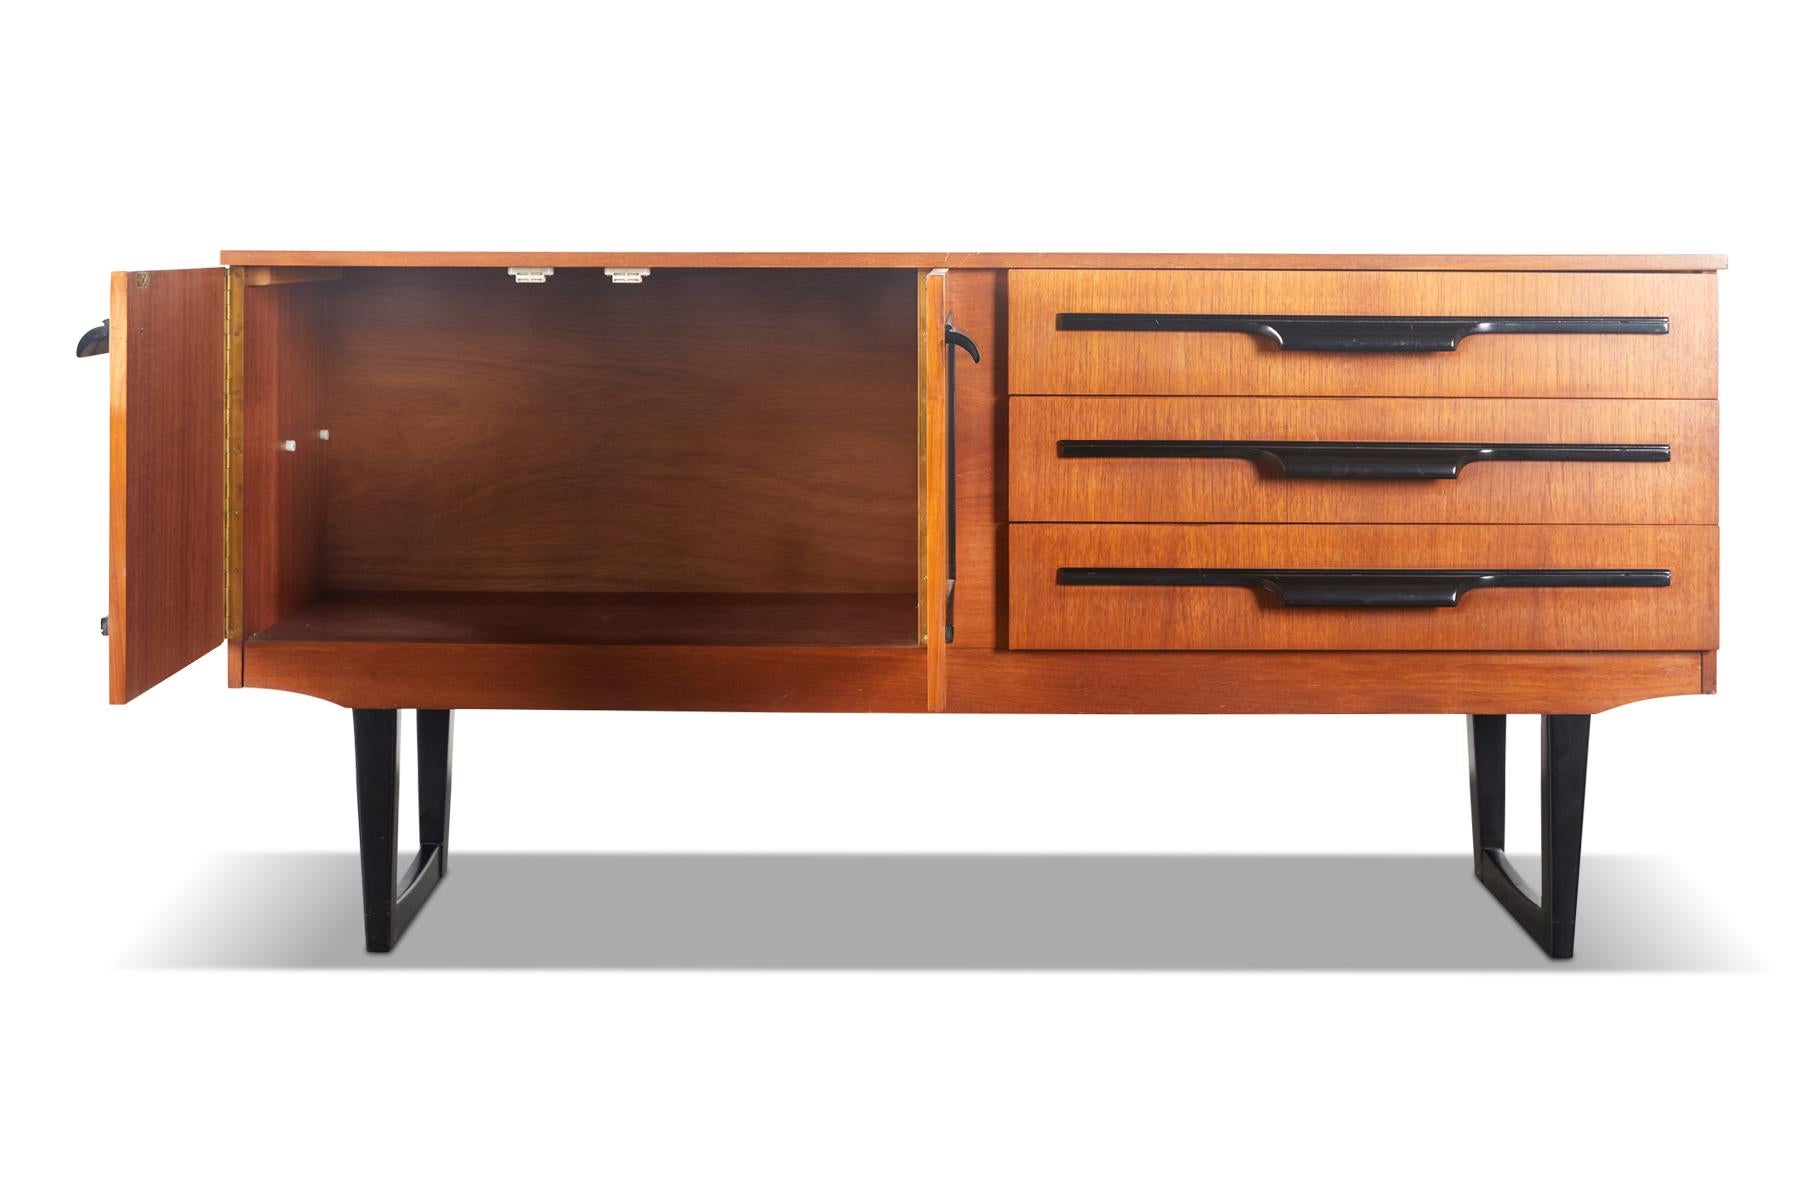 English Modern Midcentury Credenza in Teak with Black Lacquer Accents In Excellent Condition For Sale In Berkeley, CA